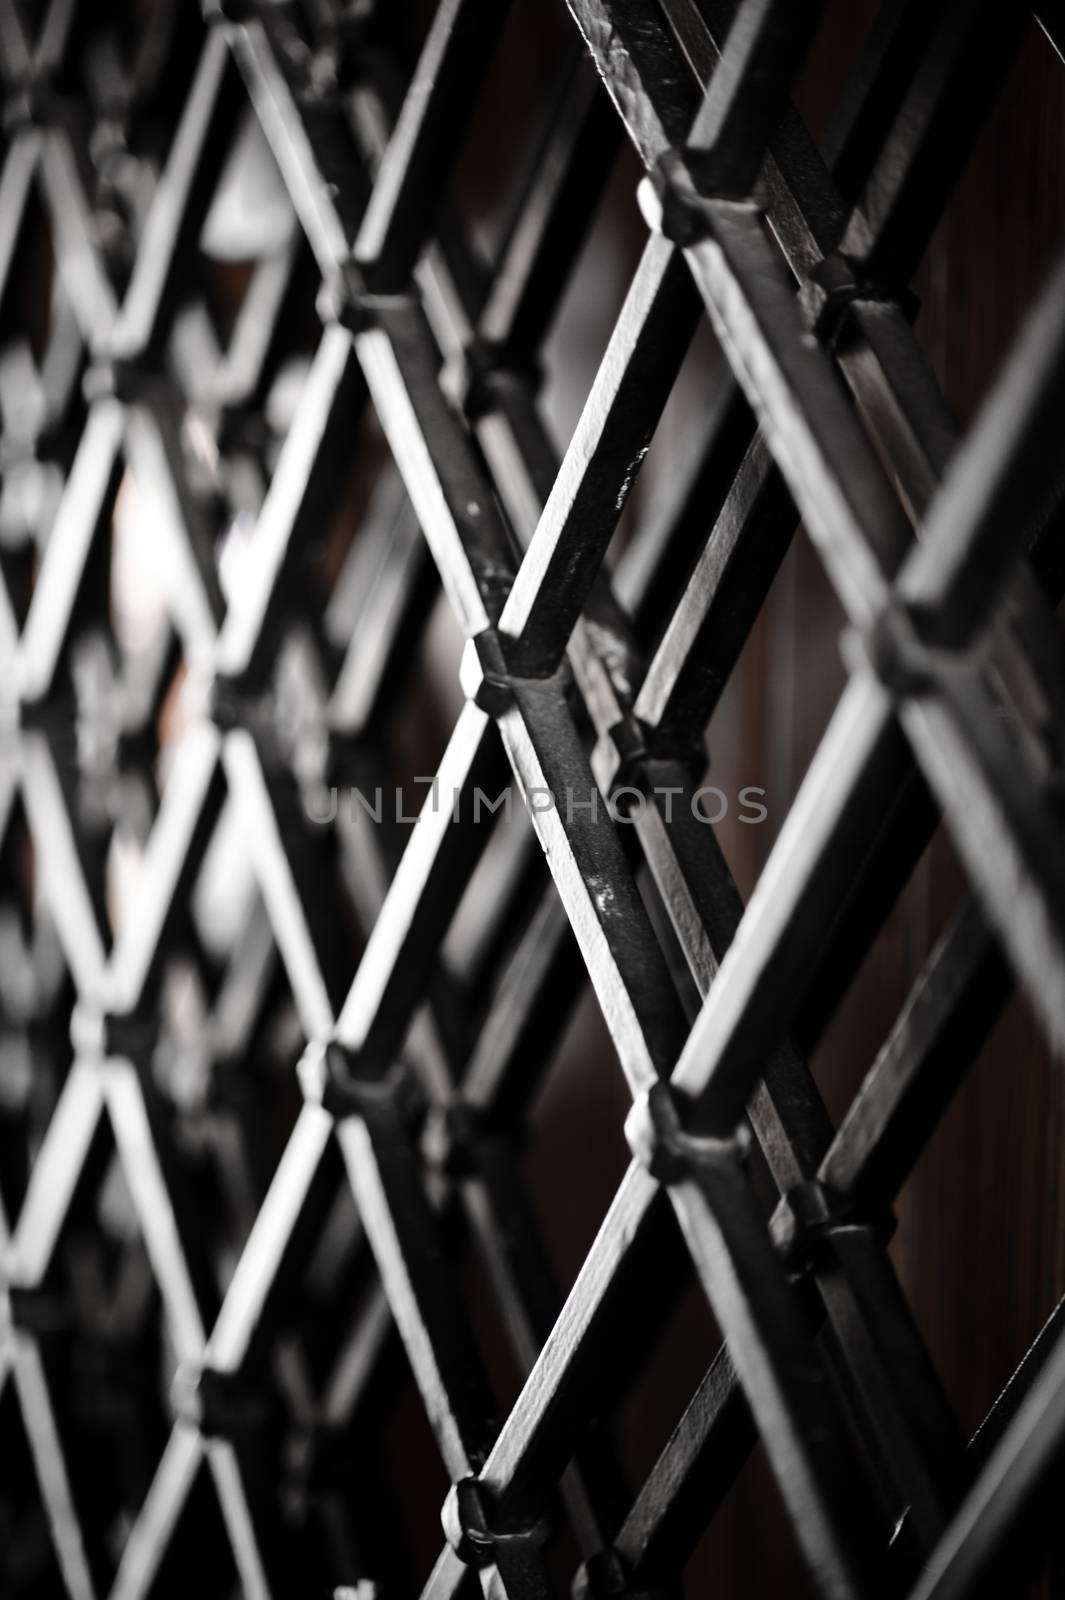 Metal Fence by welcomia